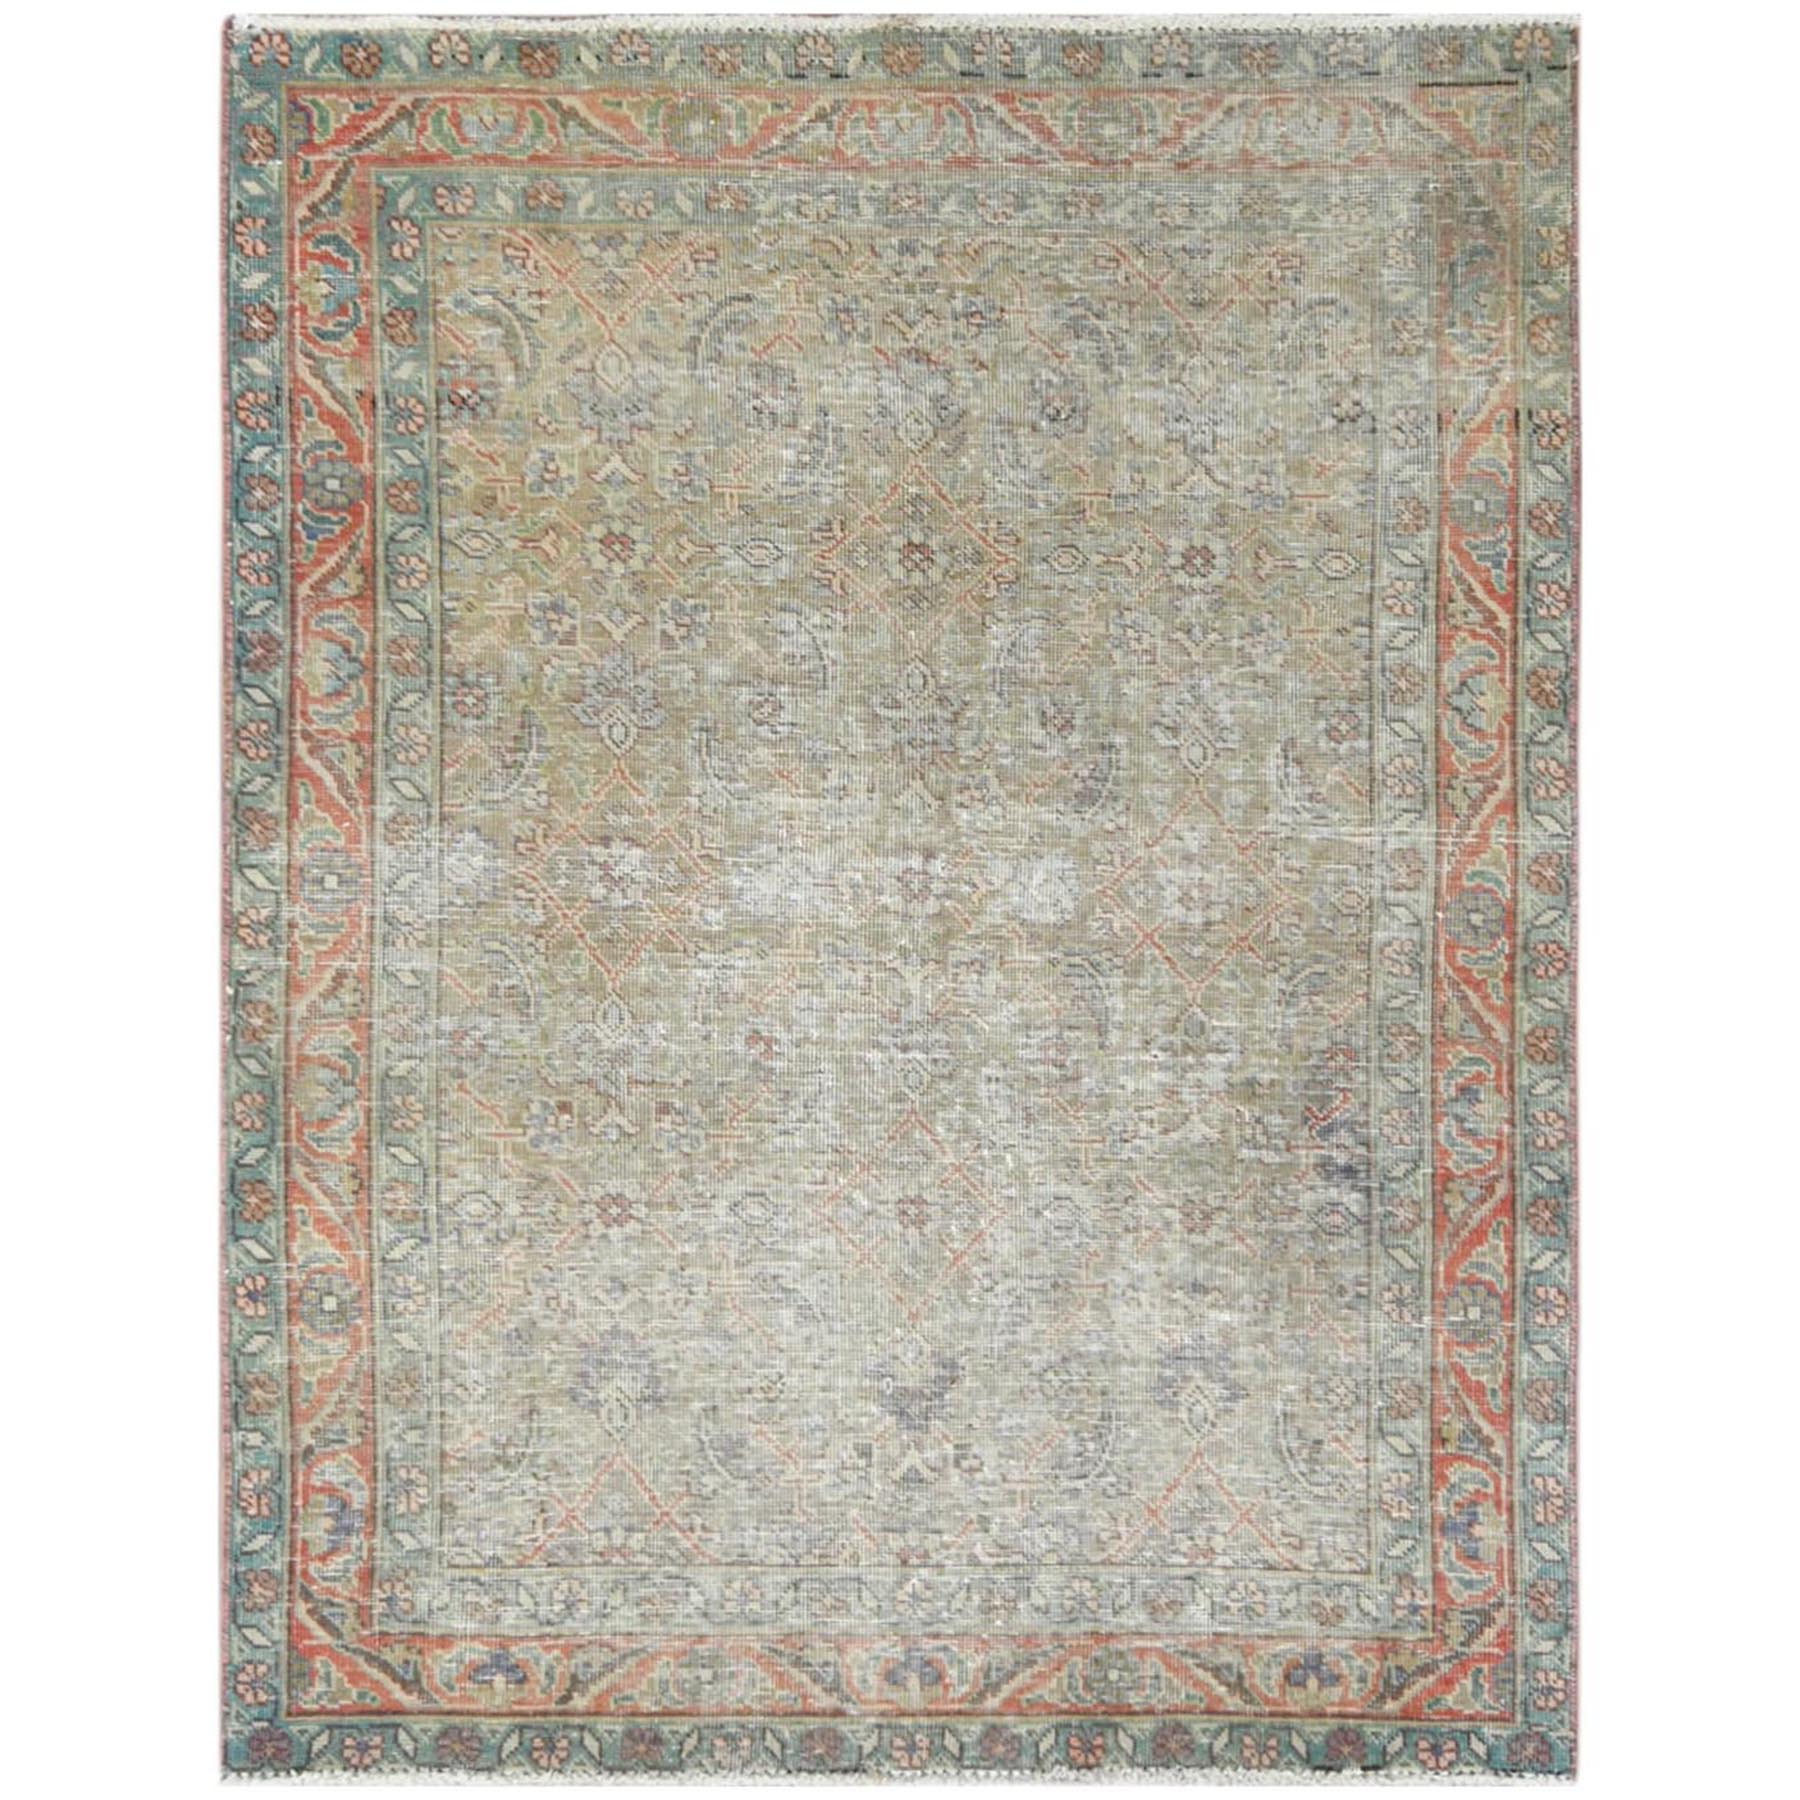 4'5"x5'10" Taupe, Sheared Low, Pure Wool, Hand Woven, Vintage Persian Tabriz with All Over Geometric Design, Worn Down, Oriental Rug 